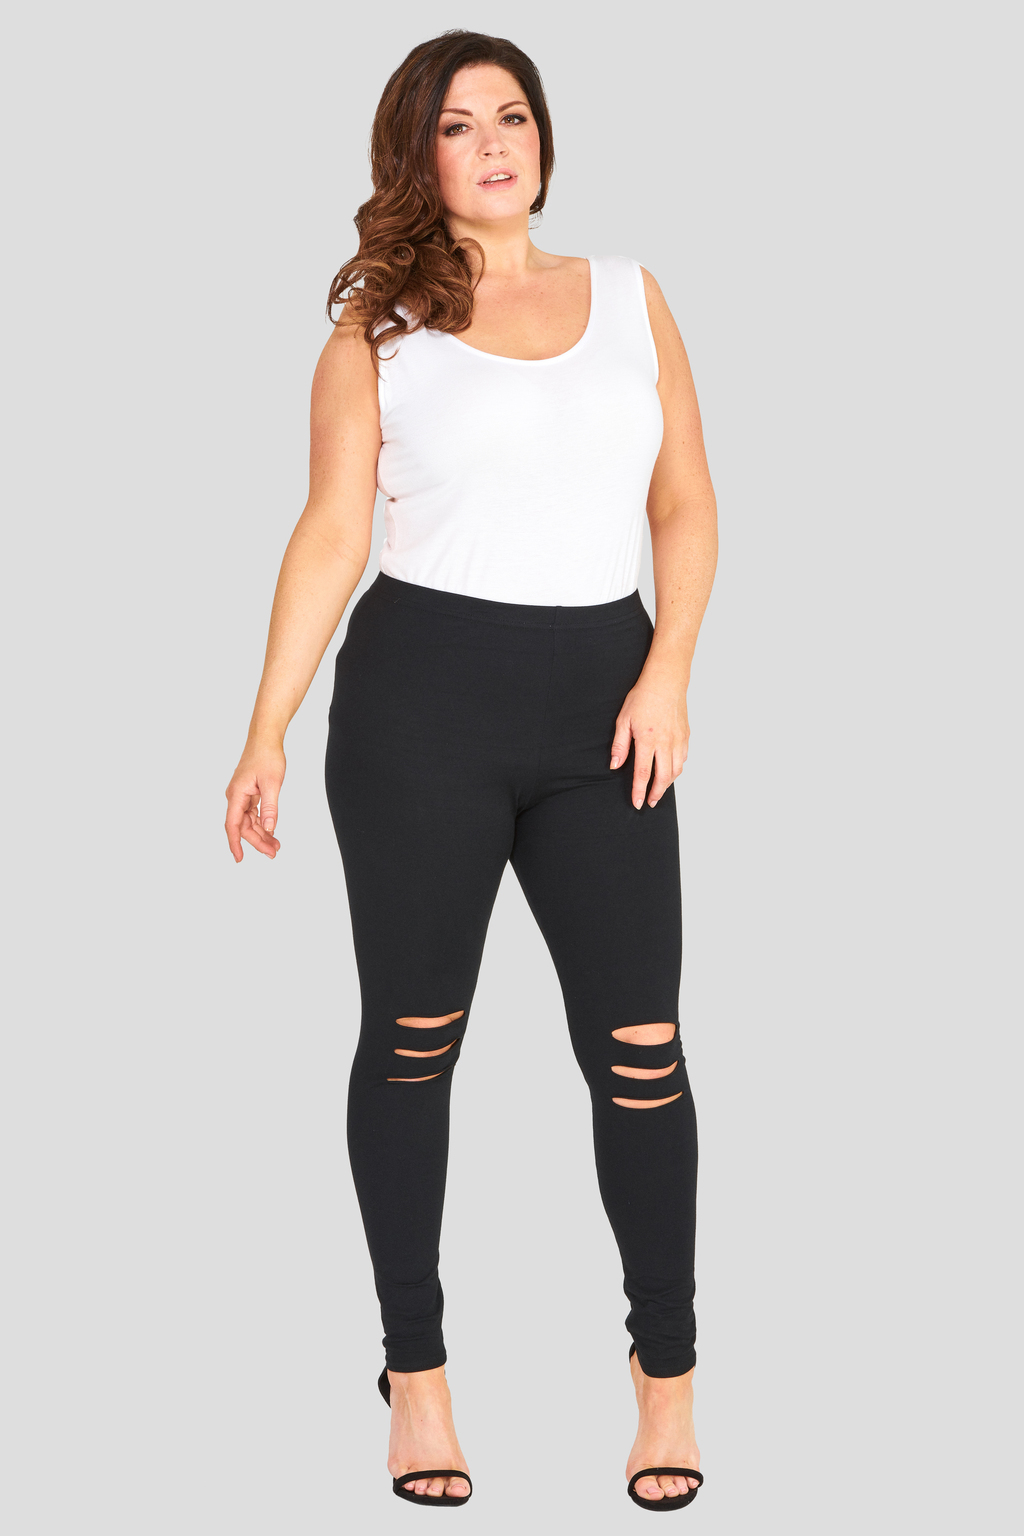 Personalized Wholesale High Elastic Women Fitness Leggings Manufacturers In  USA, AUS, CA And UAE